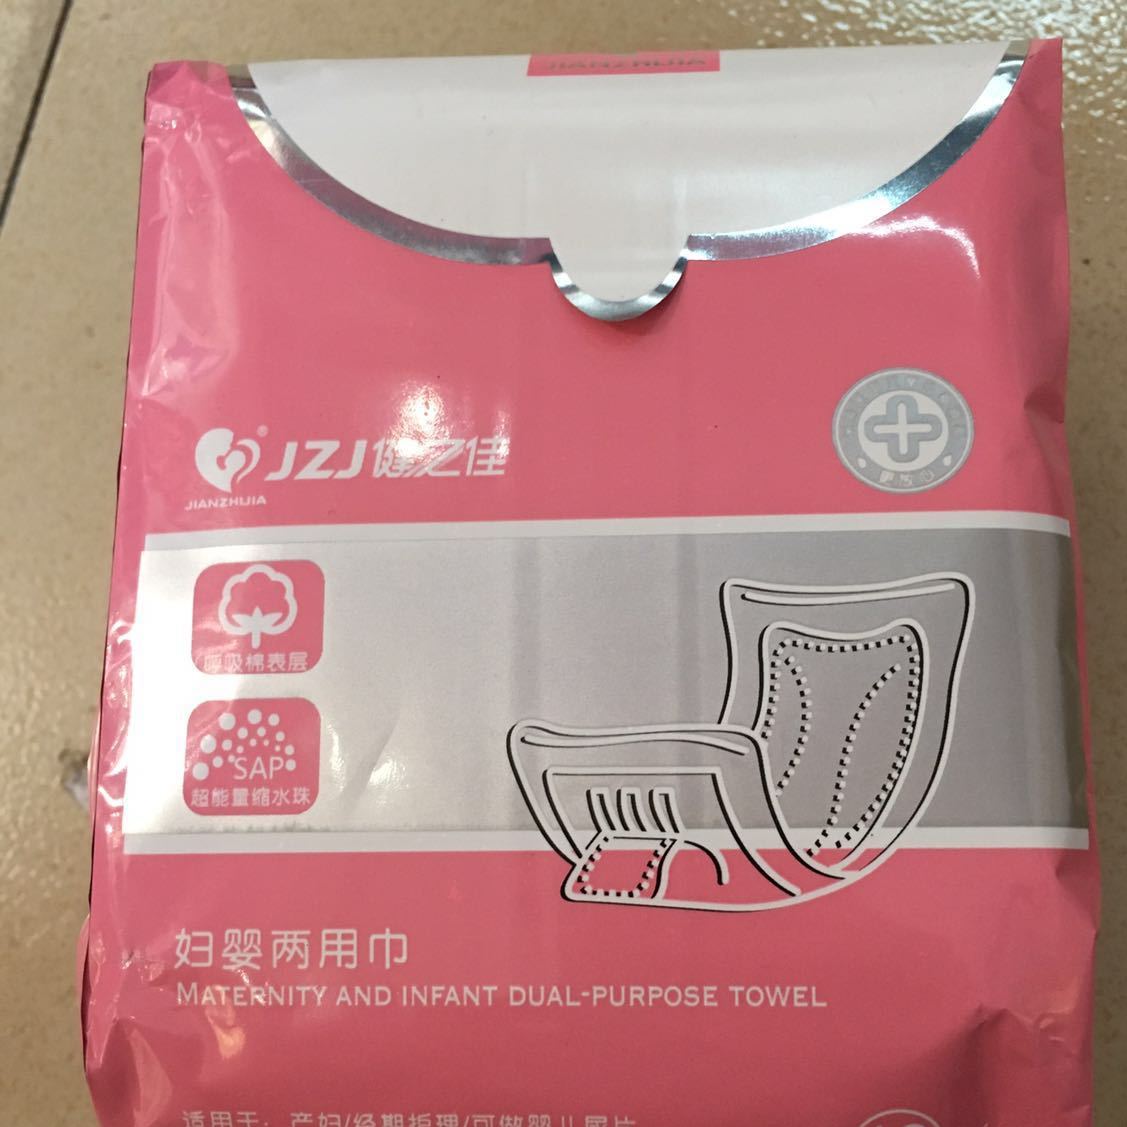 Jianzhijia dual-use towel maternal menstrual care baby diaper products sell well